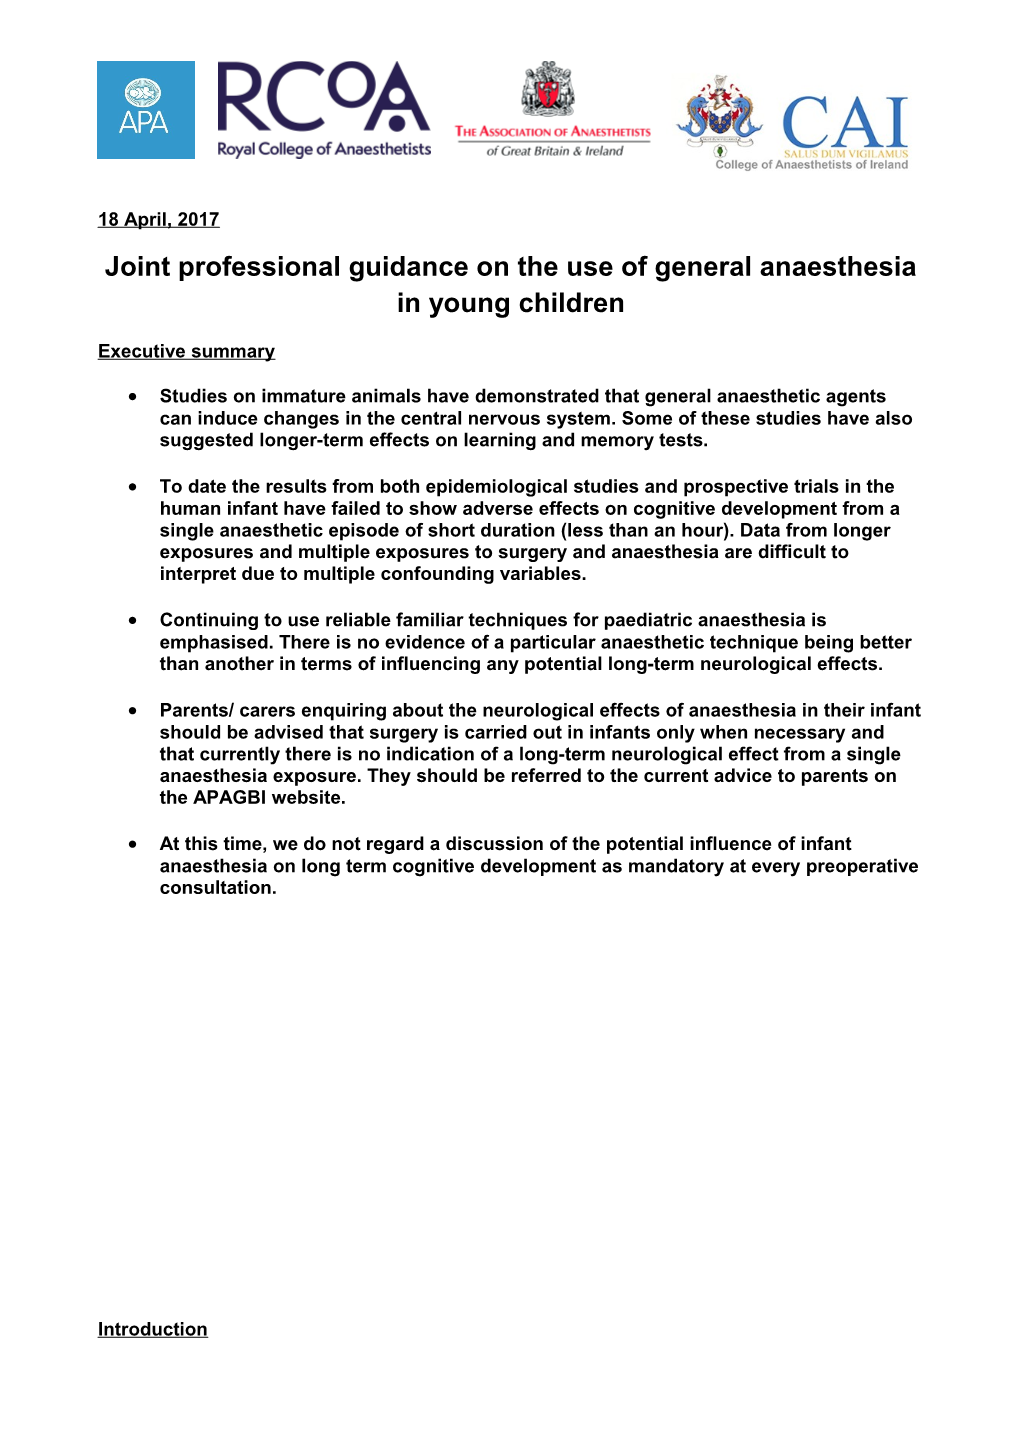 Joint Professional Guidance on the Use of General Anaesthesia in Young Children